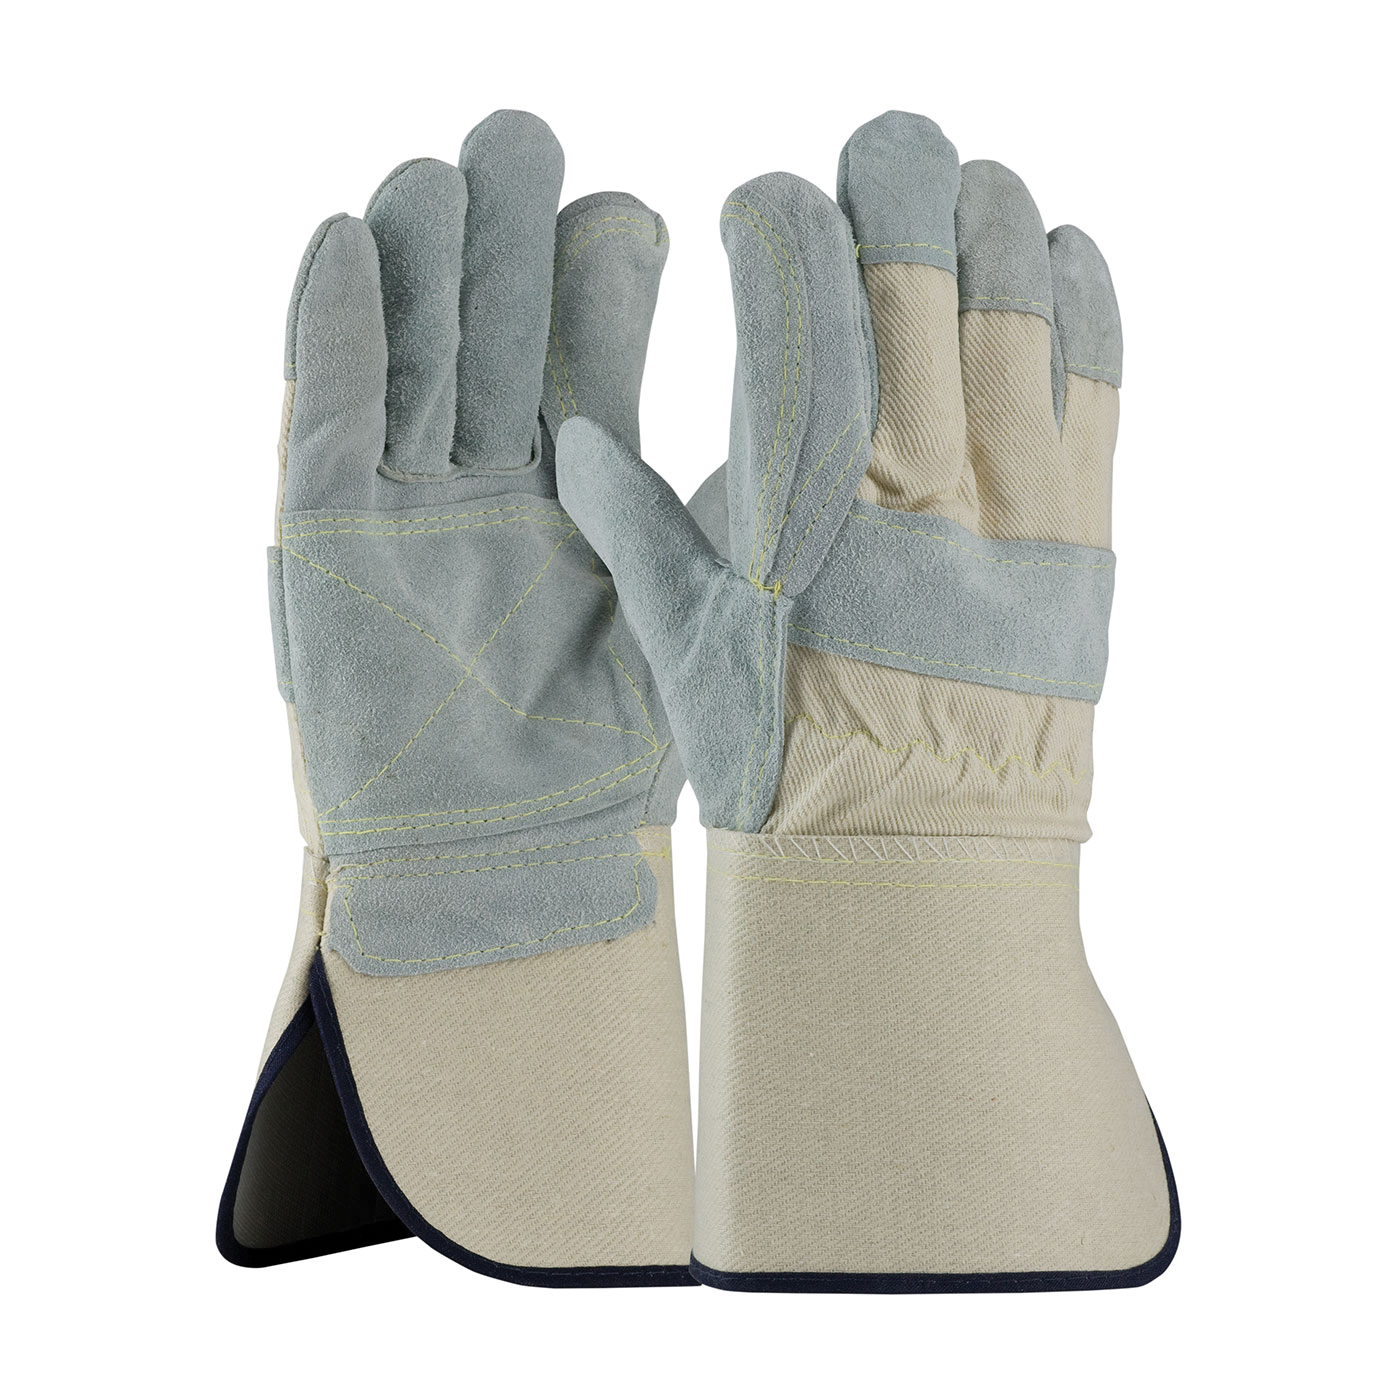 PIP® 80-8866/XL Heavy Side Men's General Purpose Gloves, Leather Palm, Gunn Cut/Full Finger/Wing Thumb Style, XL, Split Cowhide Leather Palm, Cotton/Kevlar®/Split Cowhide Leather, Gray/Natural, Gauntlet/Rubberized Cuff, Uncoated Coating, Cotton Lining